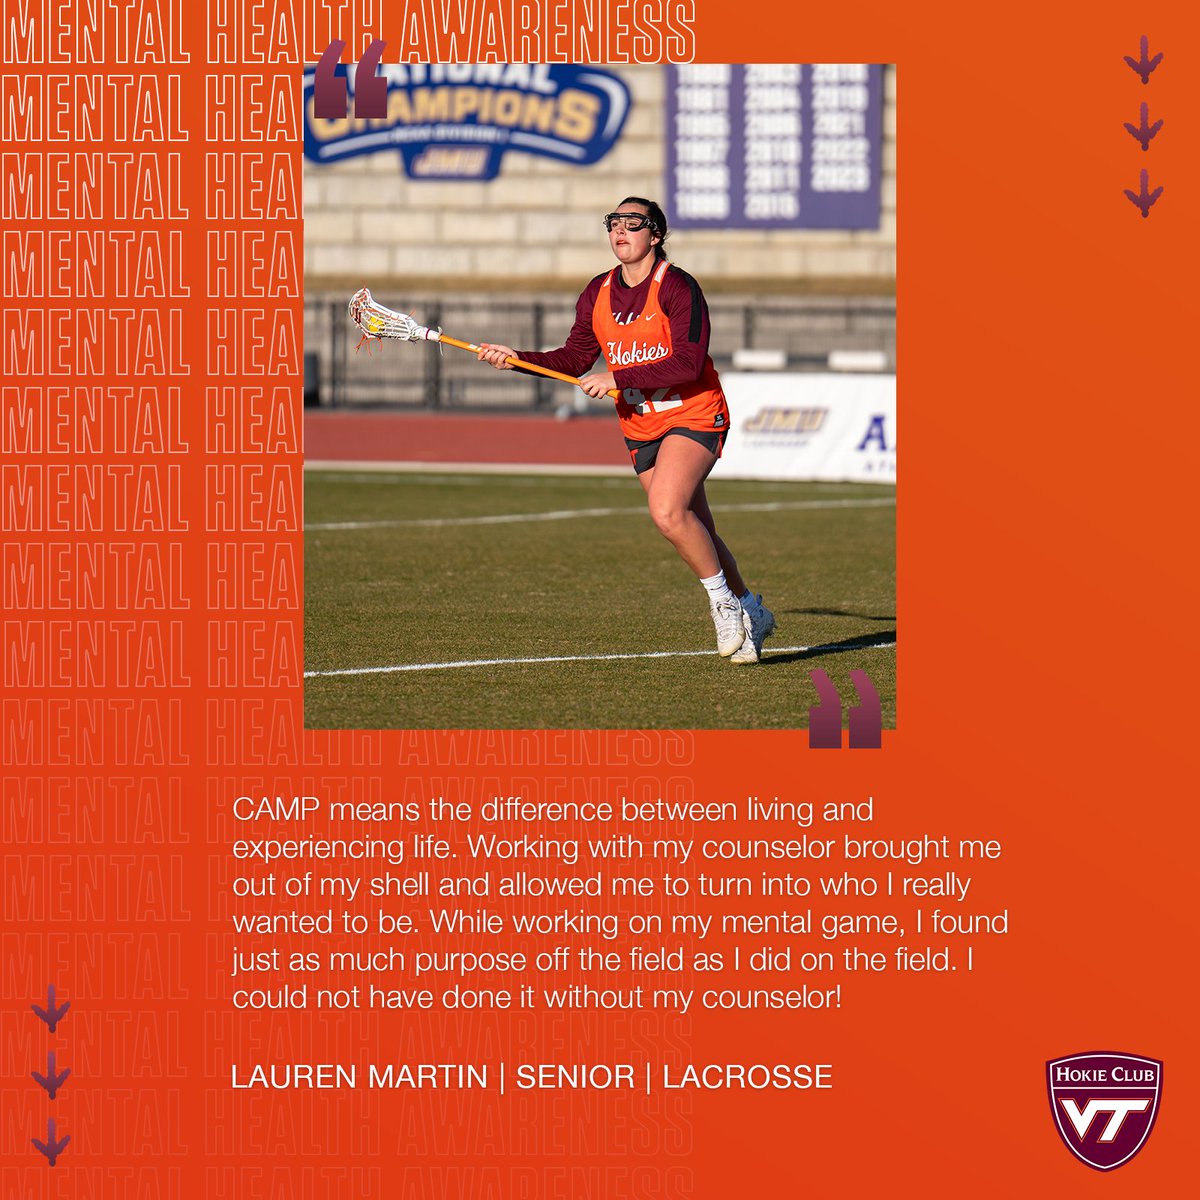 Mental Health Awareness Month continues ❤️ Counseling and Mental Athletic Performance at Virginia Tech makes a lasting positive impact on so many student-athletes in Blacksburg. Support CAMP: vthoki.es/XUu43